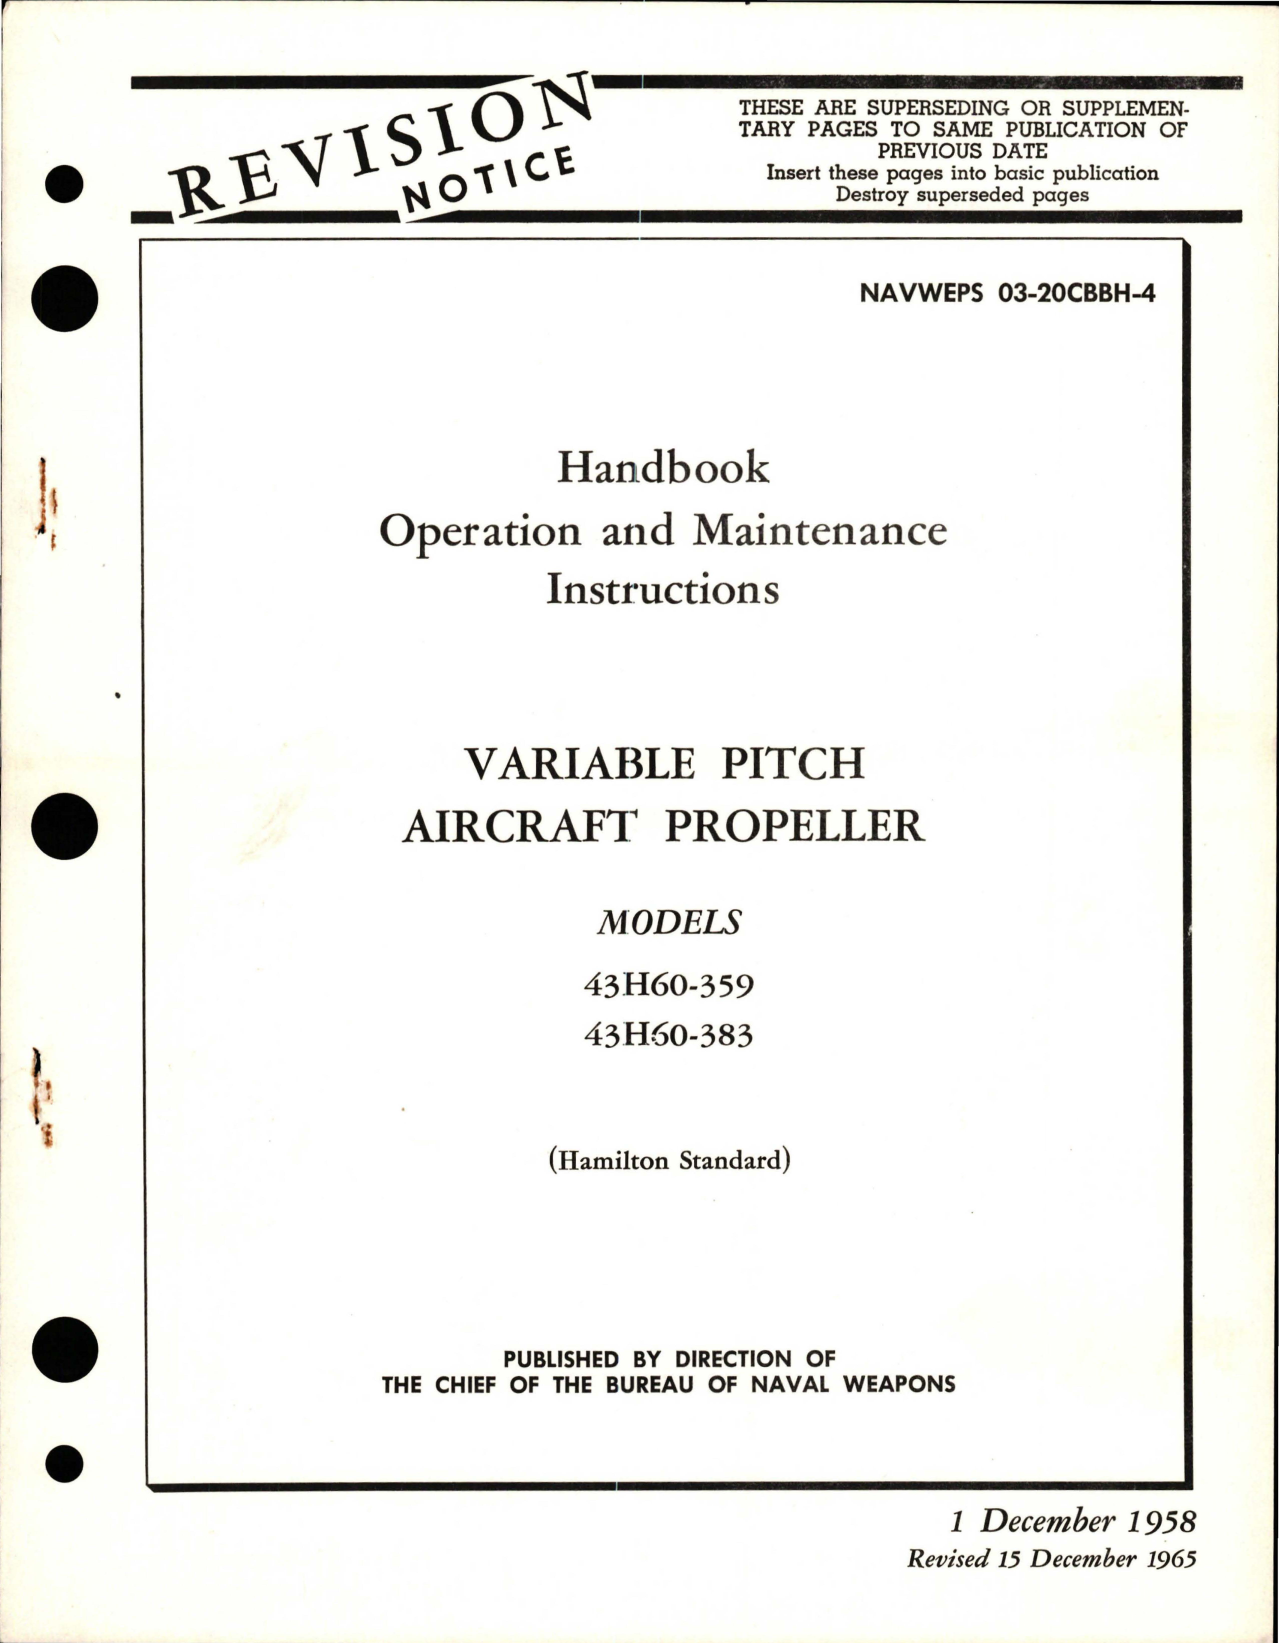 Sample page 1 from AirCorps Library document: Operation and Maintenance Instructions for Variable Pitch Propeller - Models 43H60-383 and 43H60-359